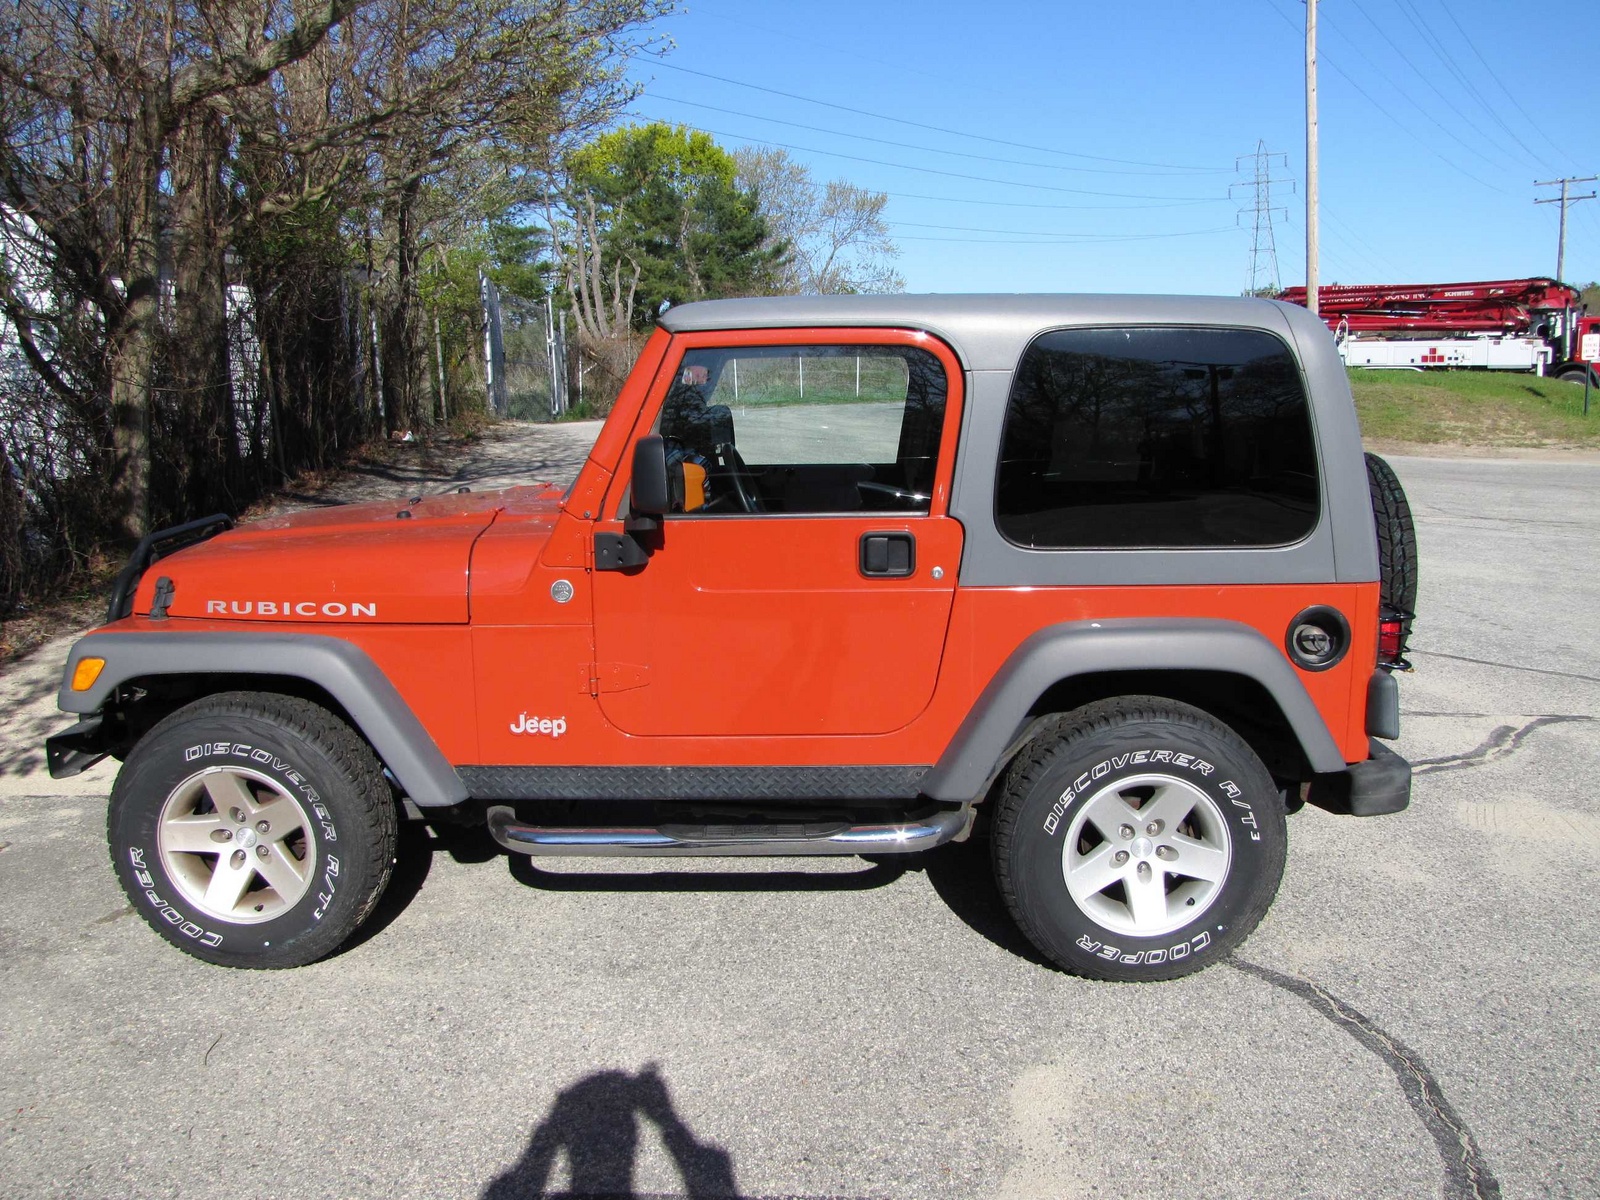 2005 Jeep rubicon unlimited mpg #5